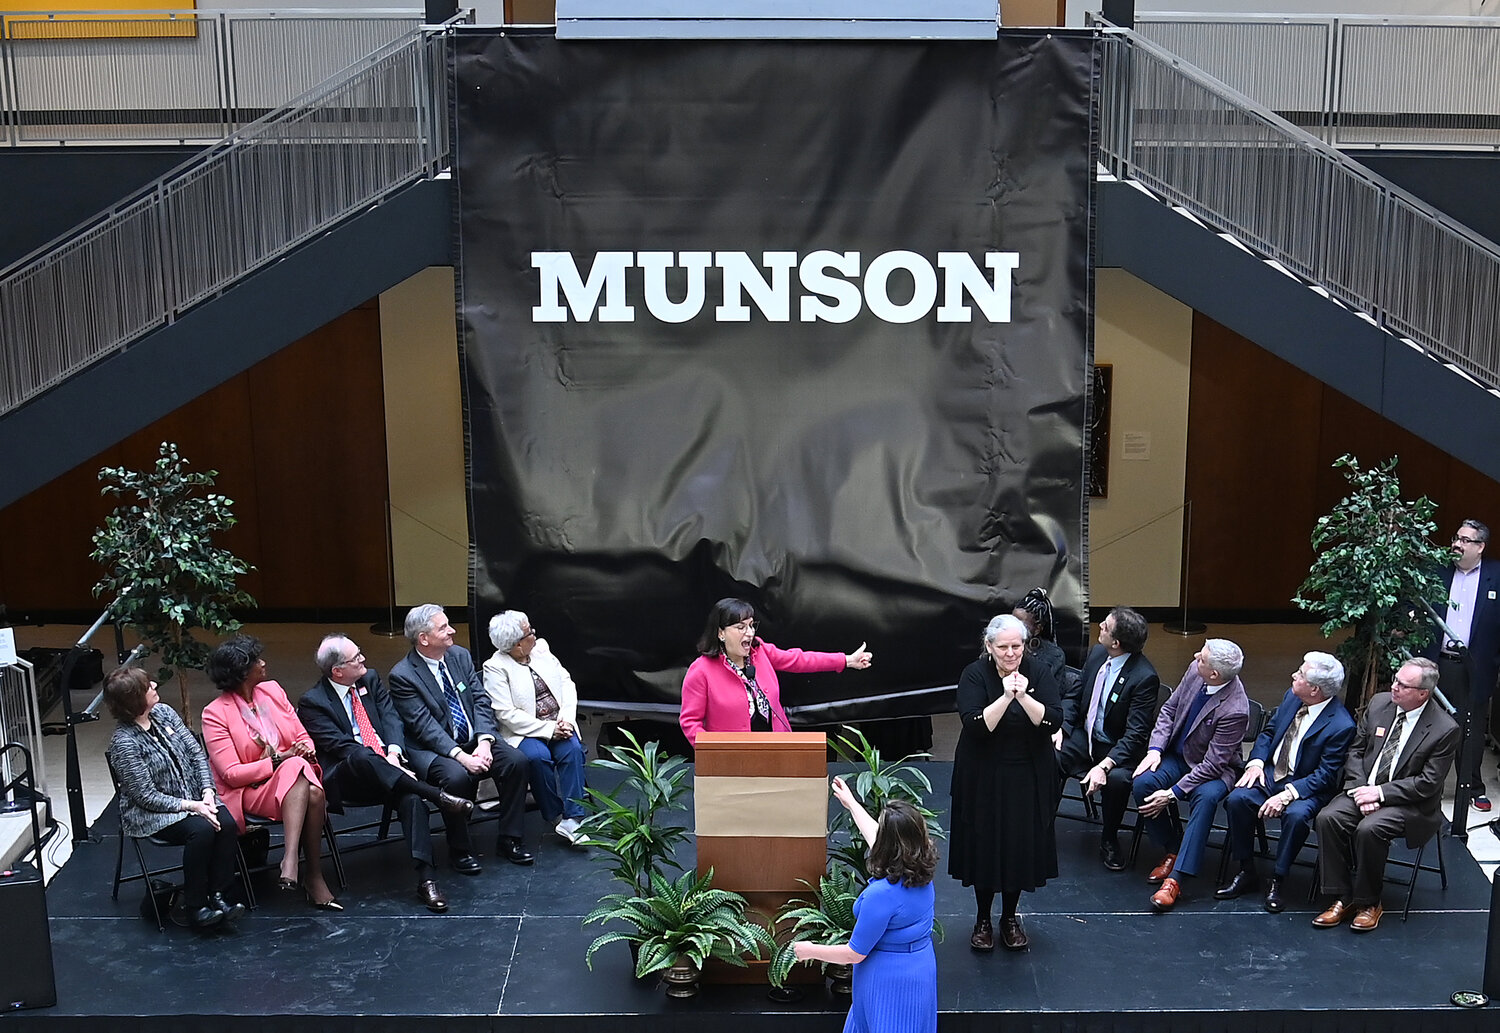 The new Munson is unfurled Tuesday afternoon with Anna D’Ambrosio, president and CEO of the facility leading the ceremony.